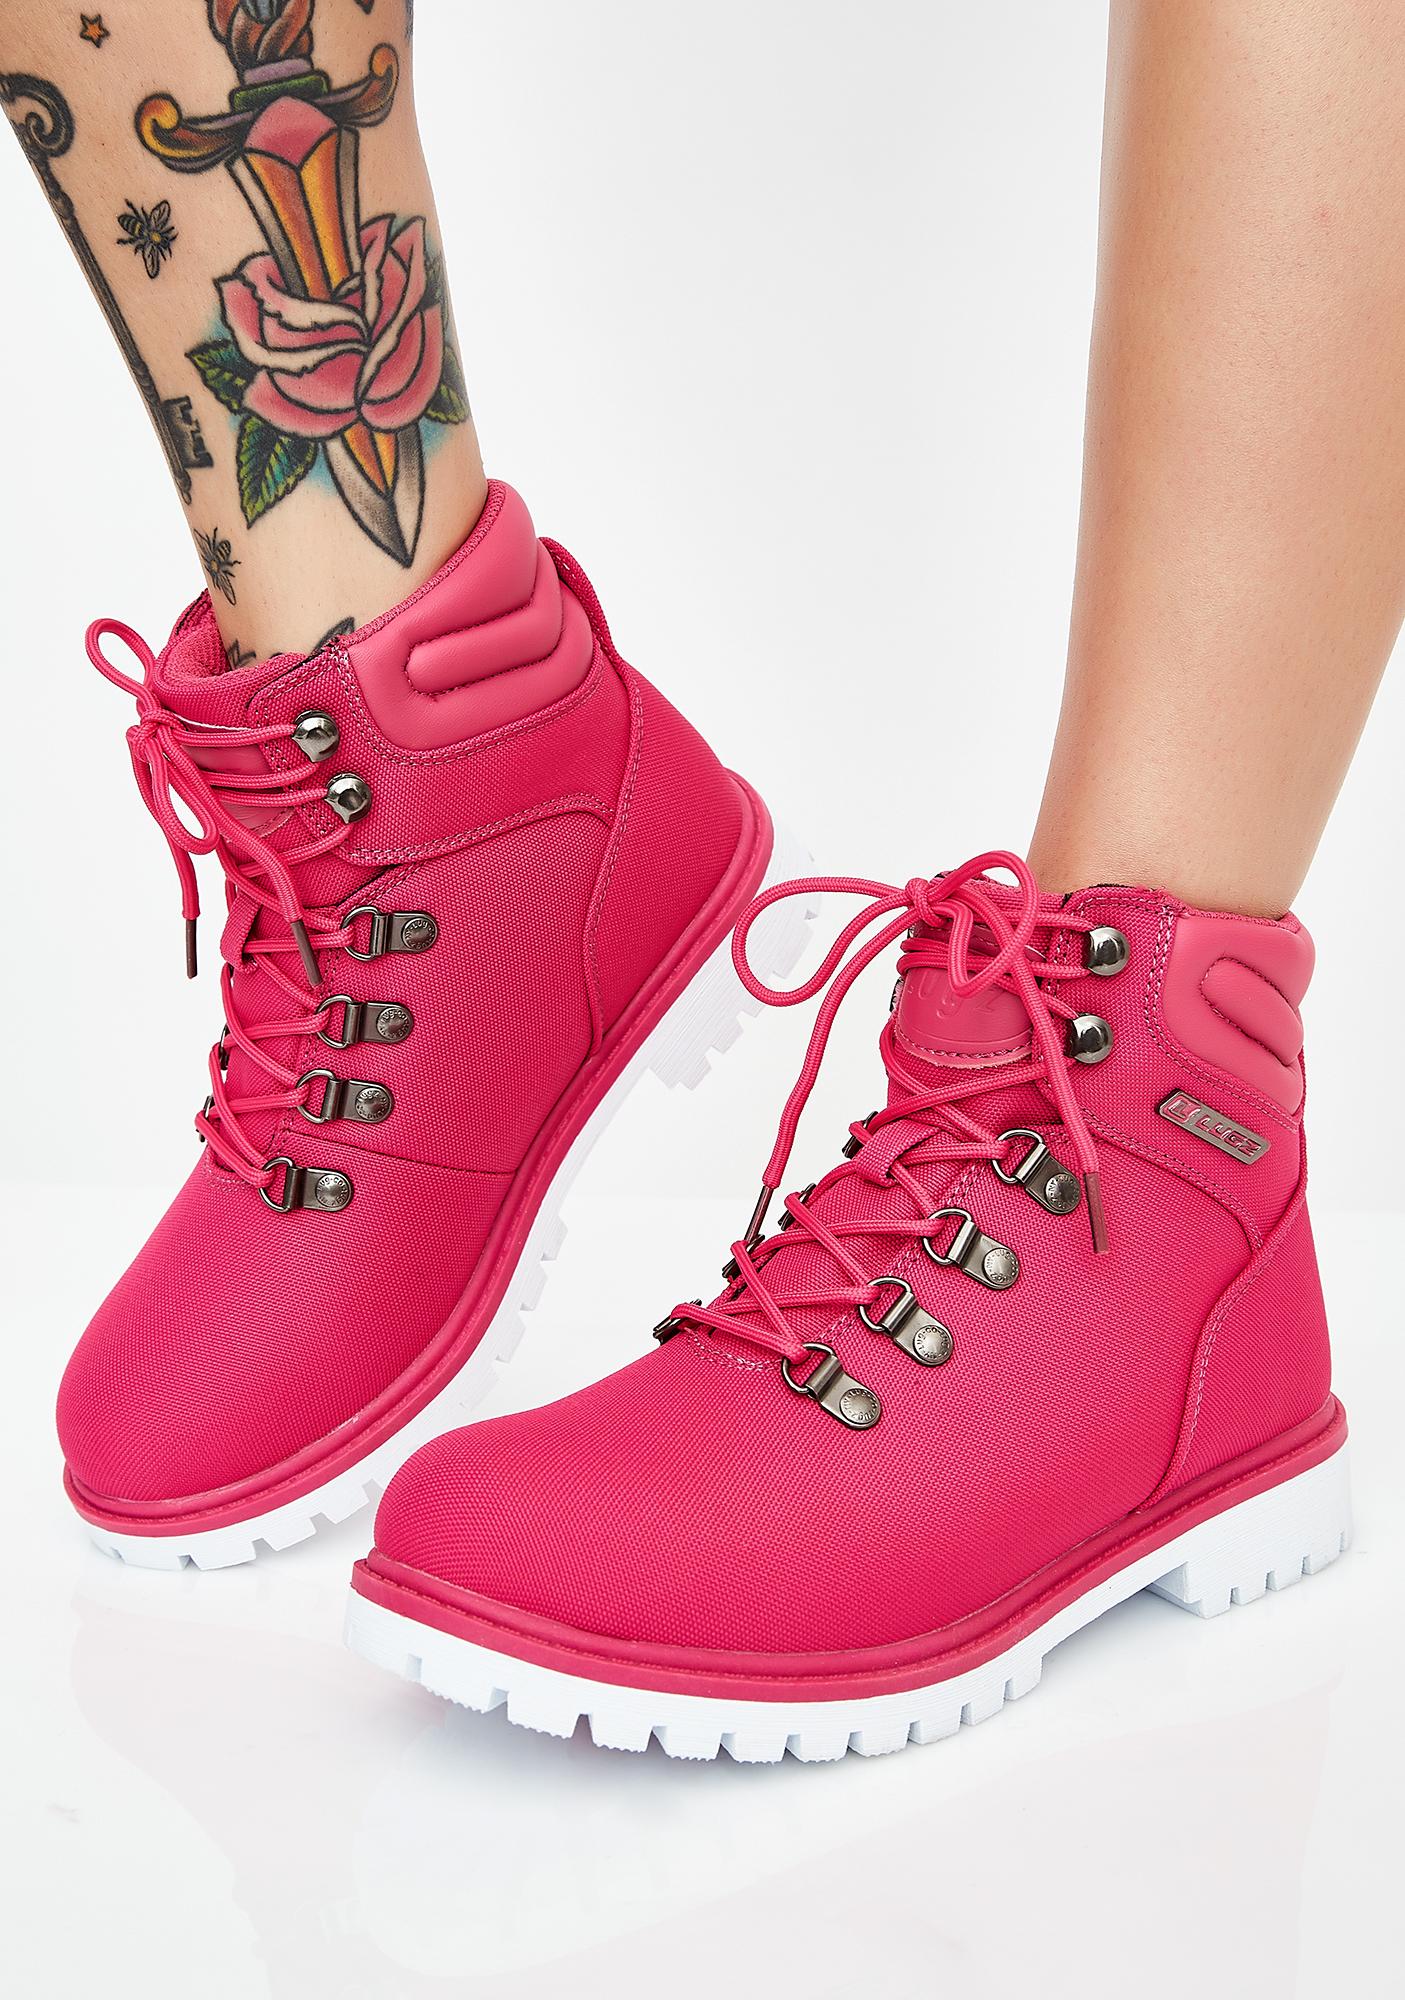 lugz red boots